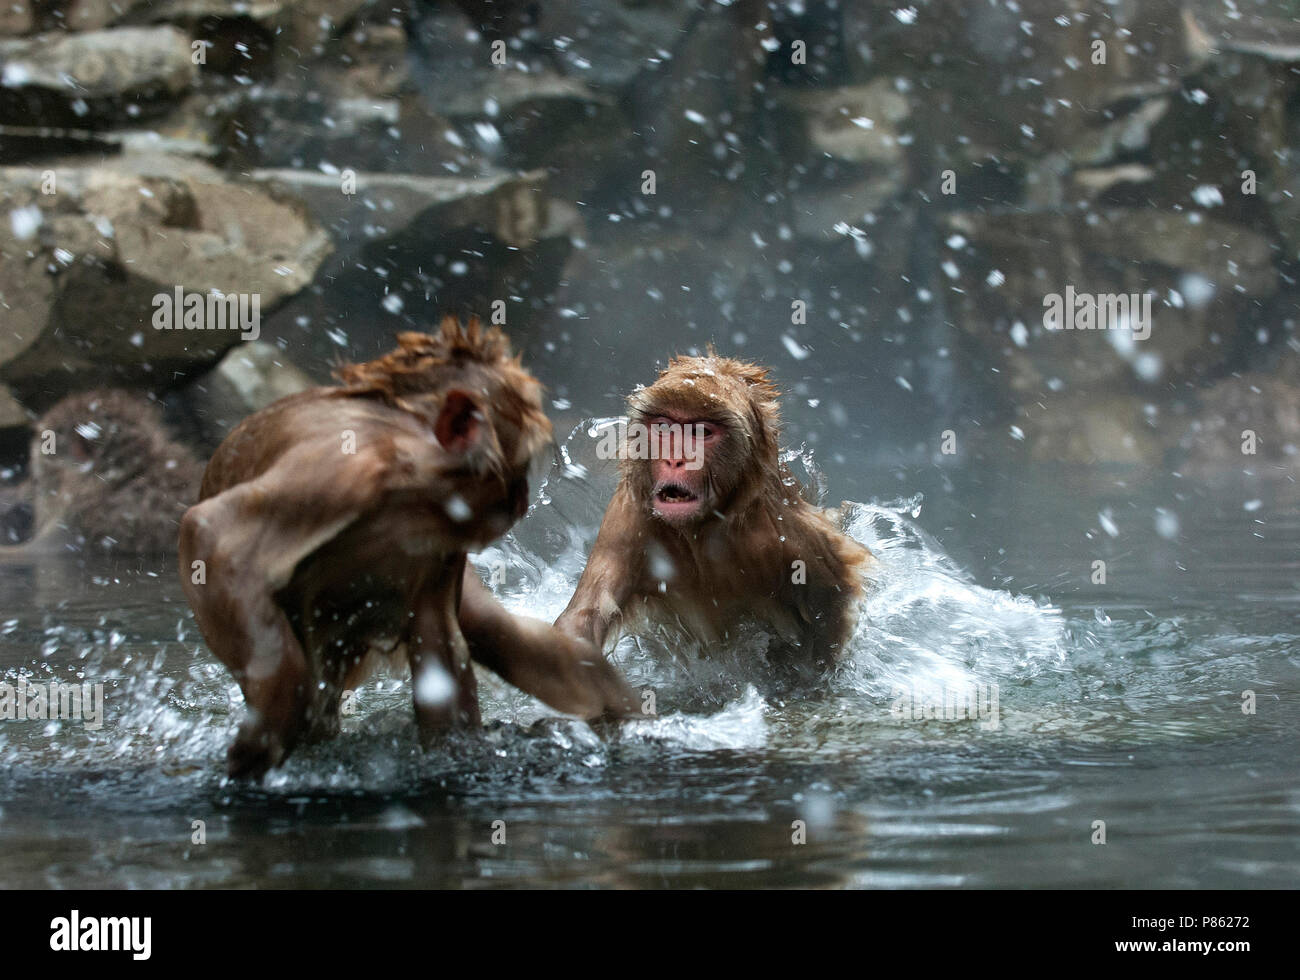 Jonge Japanse Makaken spelend in warmwaterbron, Japanese Macaques playing young in hot spring Stock Photo